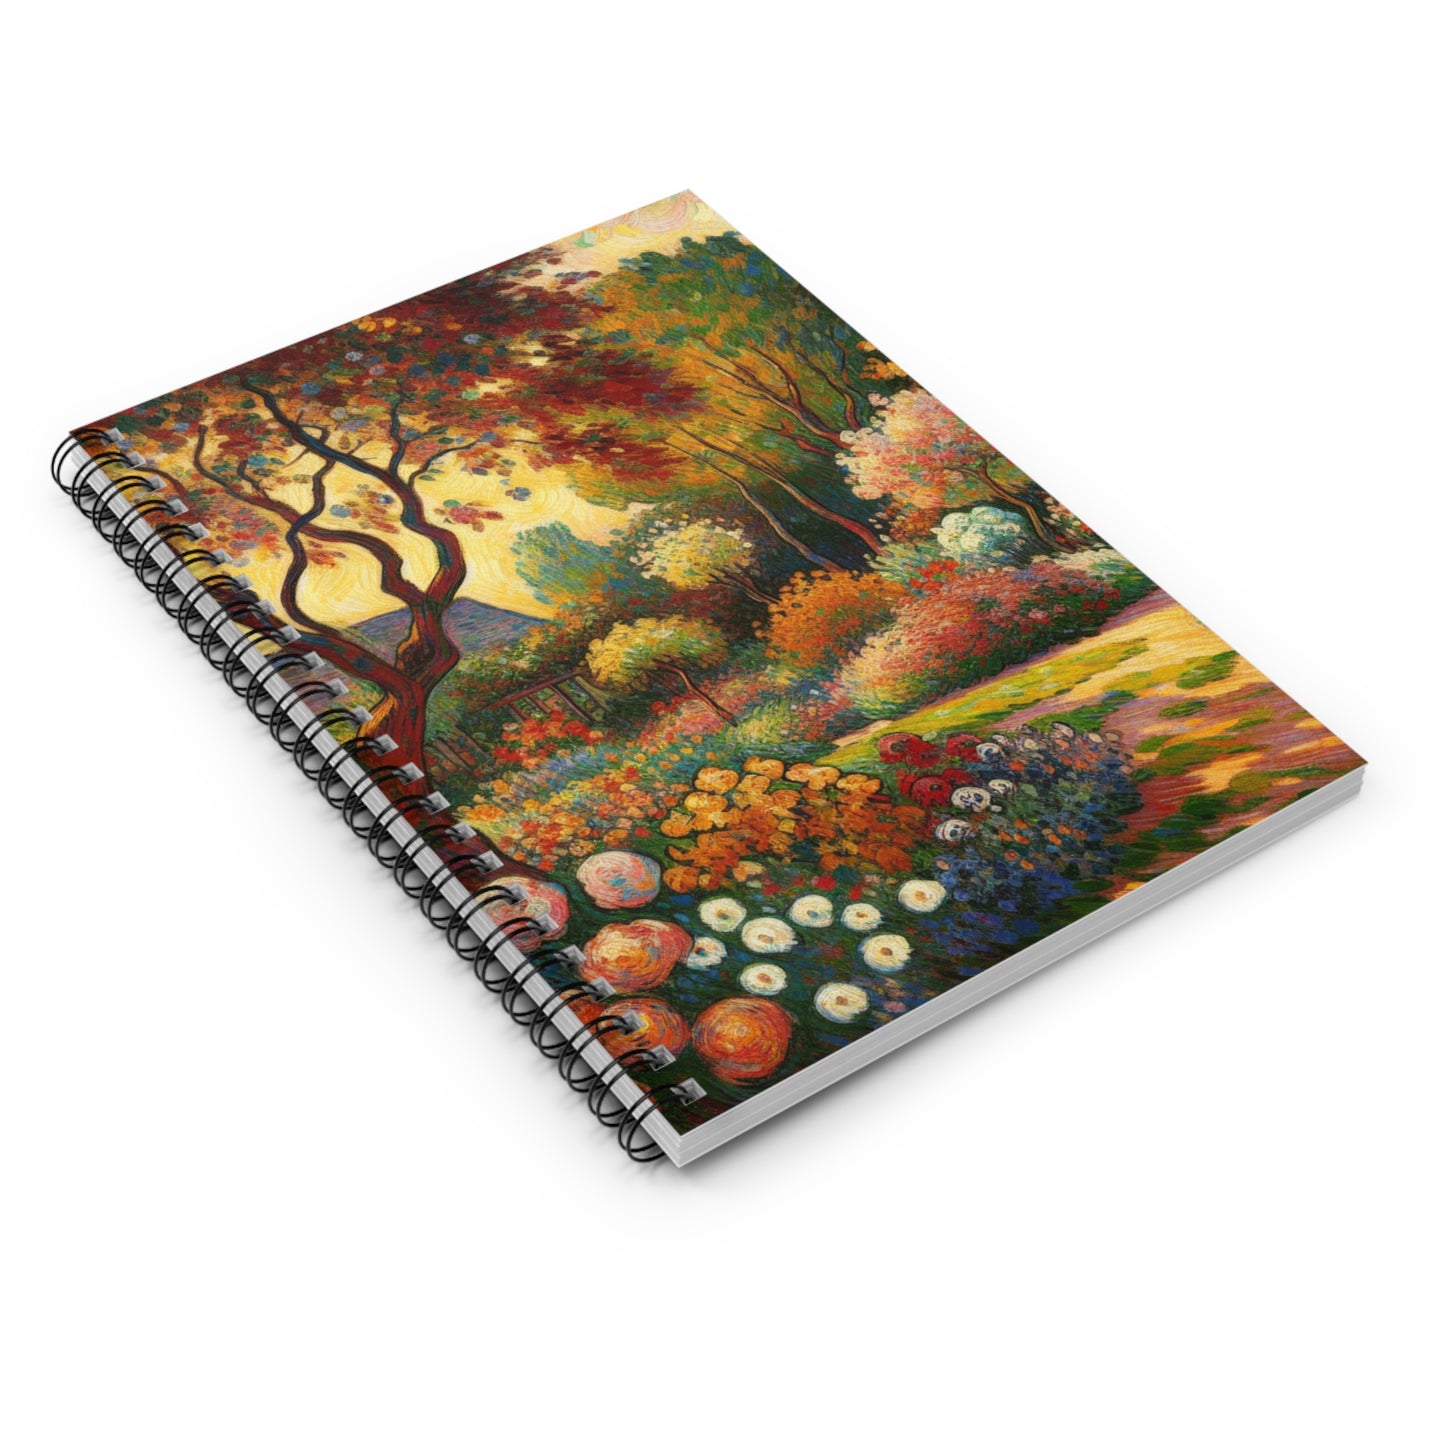 "Fauvist Garden Oasis" - The Alien Spiral Notebook (Ruled Line) Fauvism Style